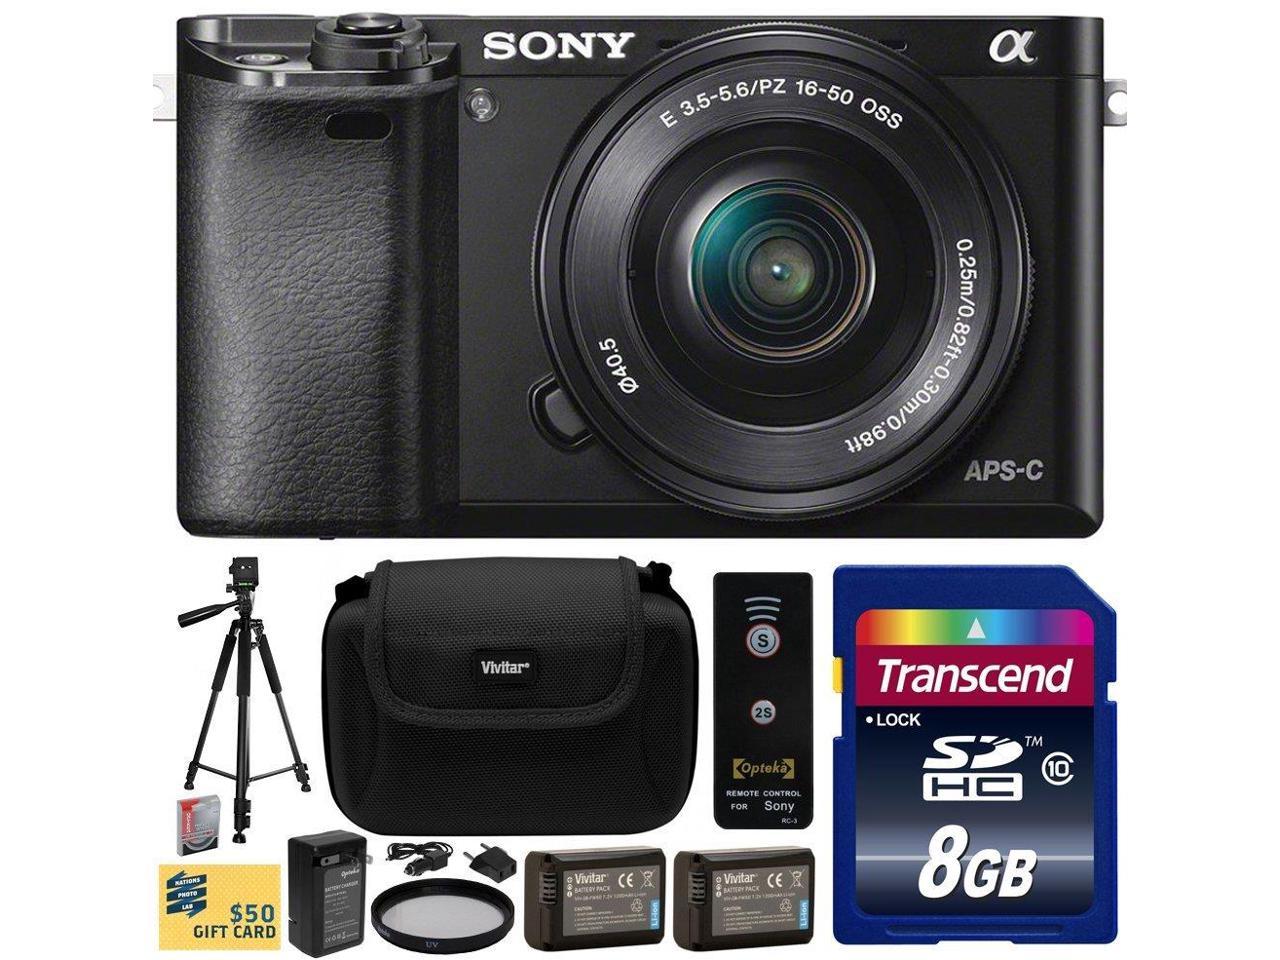 Sony Alpha a6000 24.3 MP Interchangeable Mirrorless Lens Camera with 16-50mm Power Zoom Lens with 8GB Memory Card + 2x NP-FW50 Battery + Charger + Tripod + UV Filter + Carrying Case + Wireless Remote